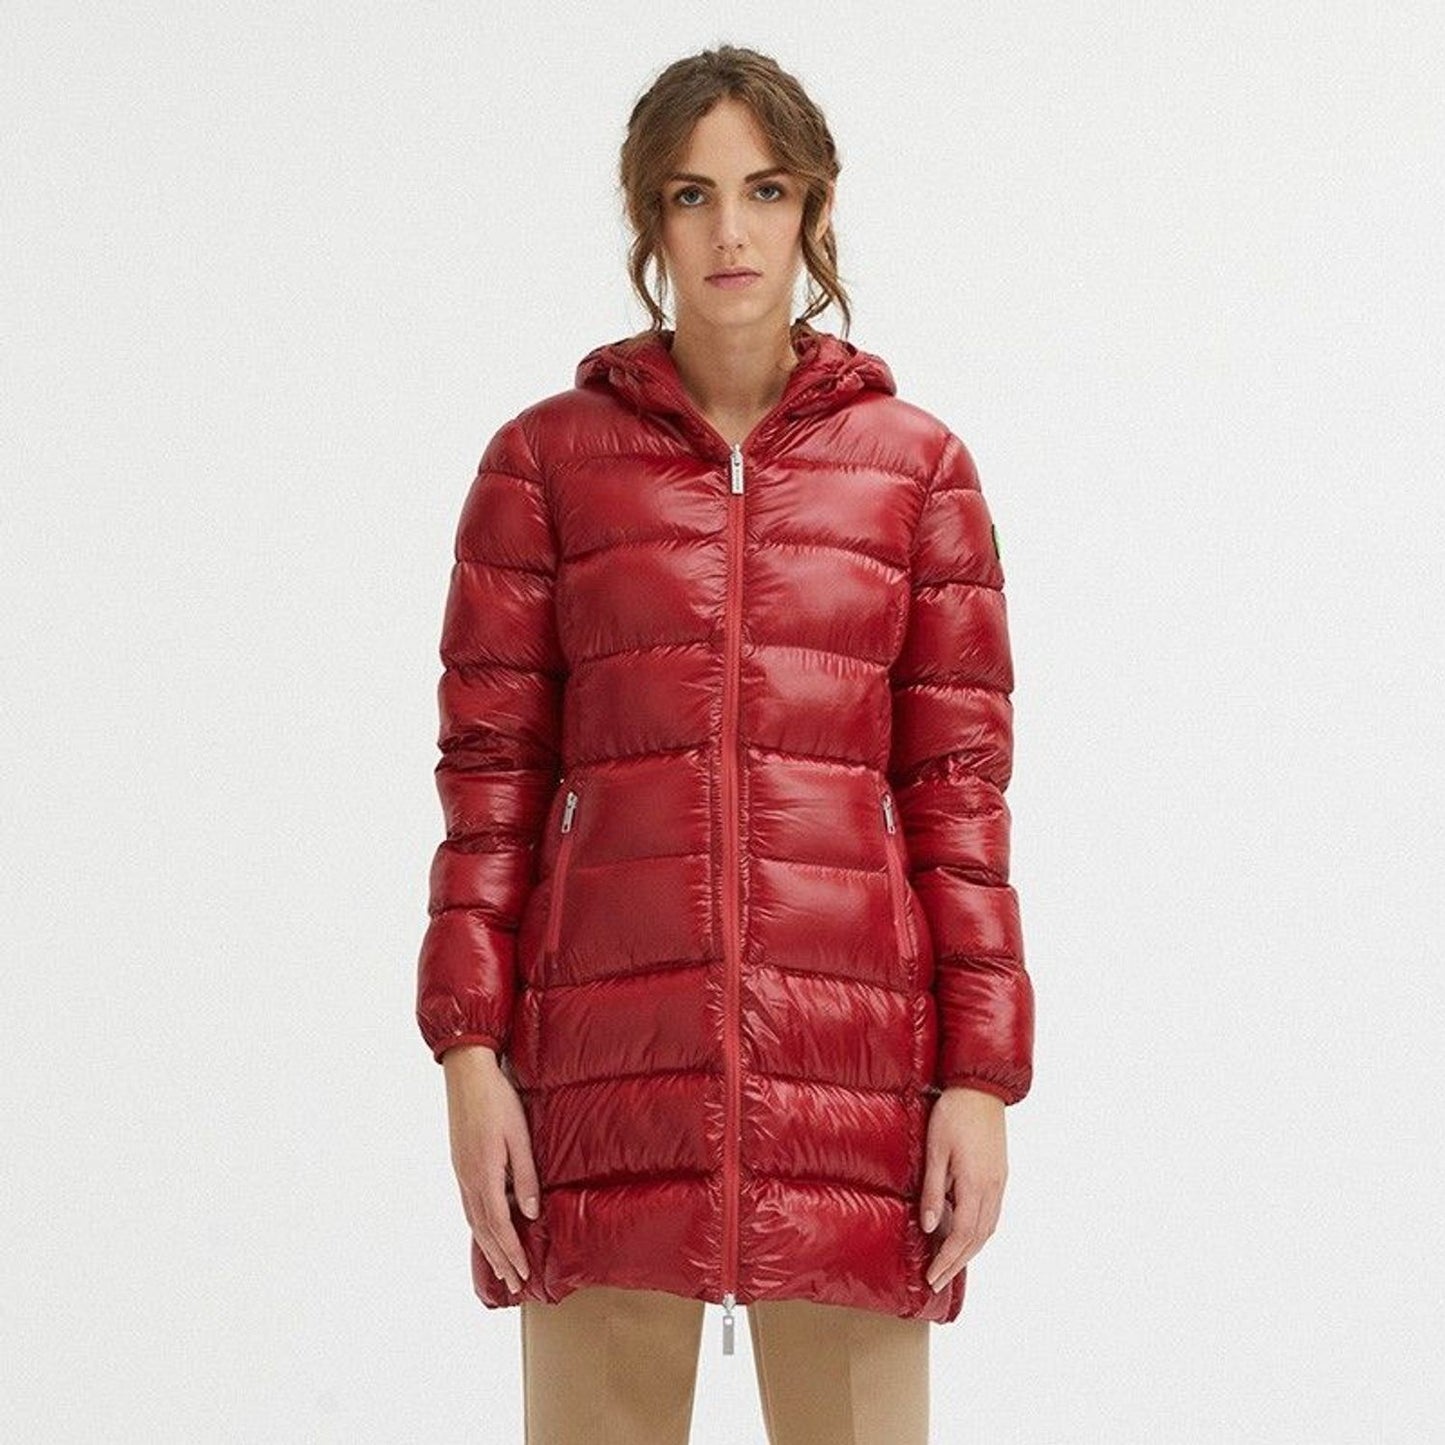 Centogrammi Reversible Goose Down Long Jacket in Pink red-nylon-jackets-coat-3 product-8316-1295985519-10-22a71ba5-7d6.jpg